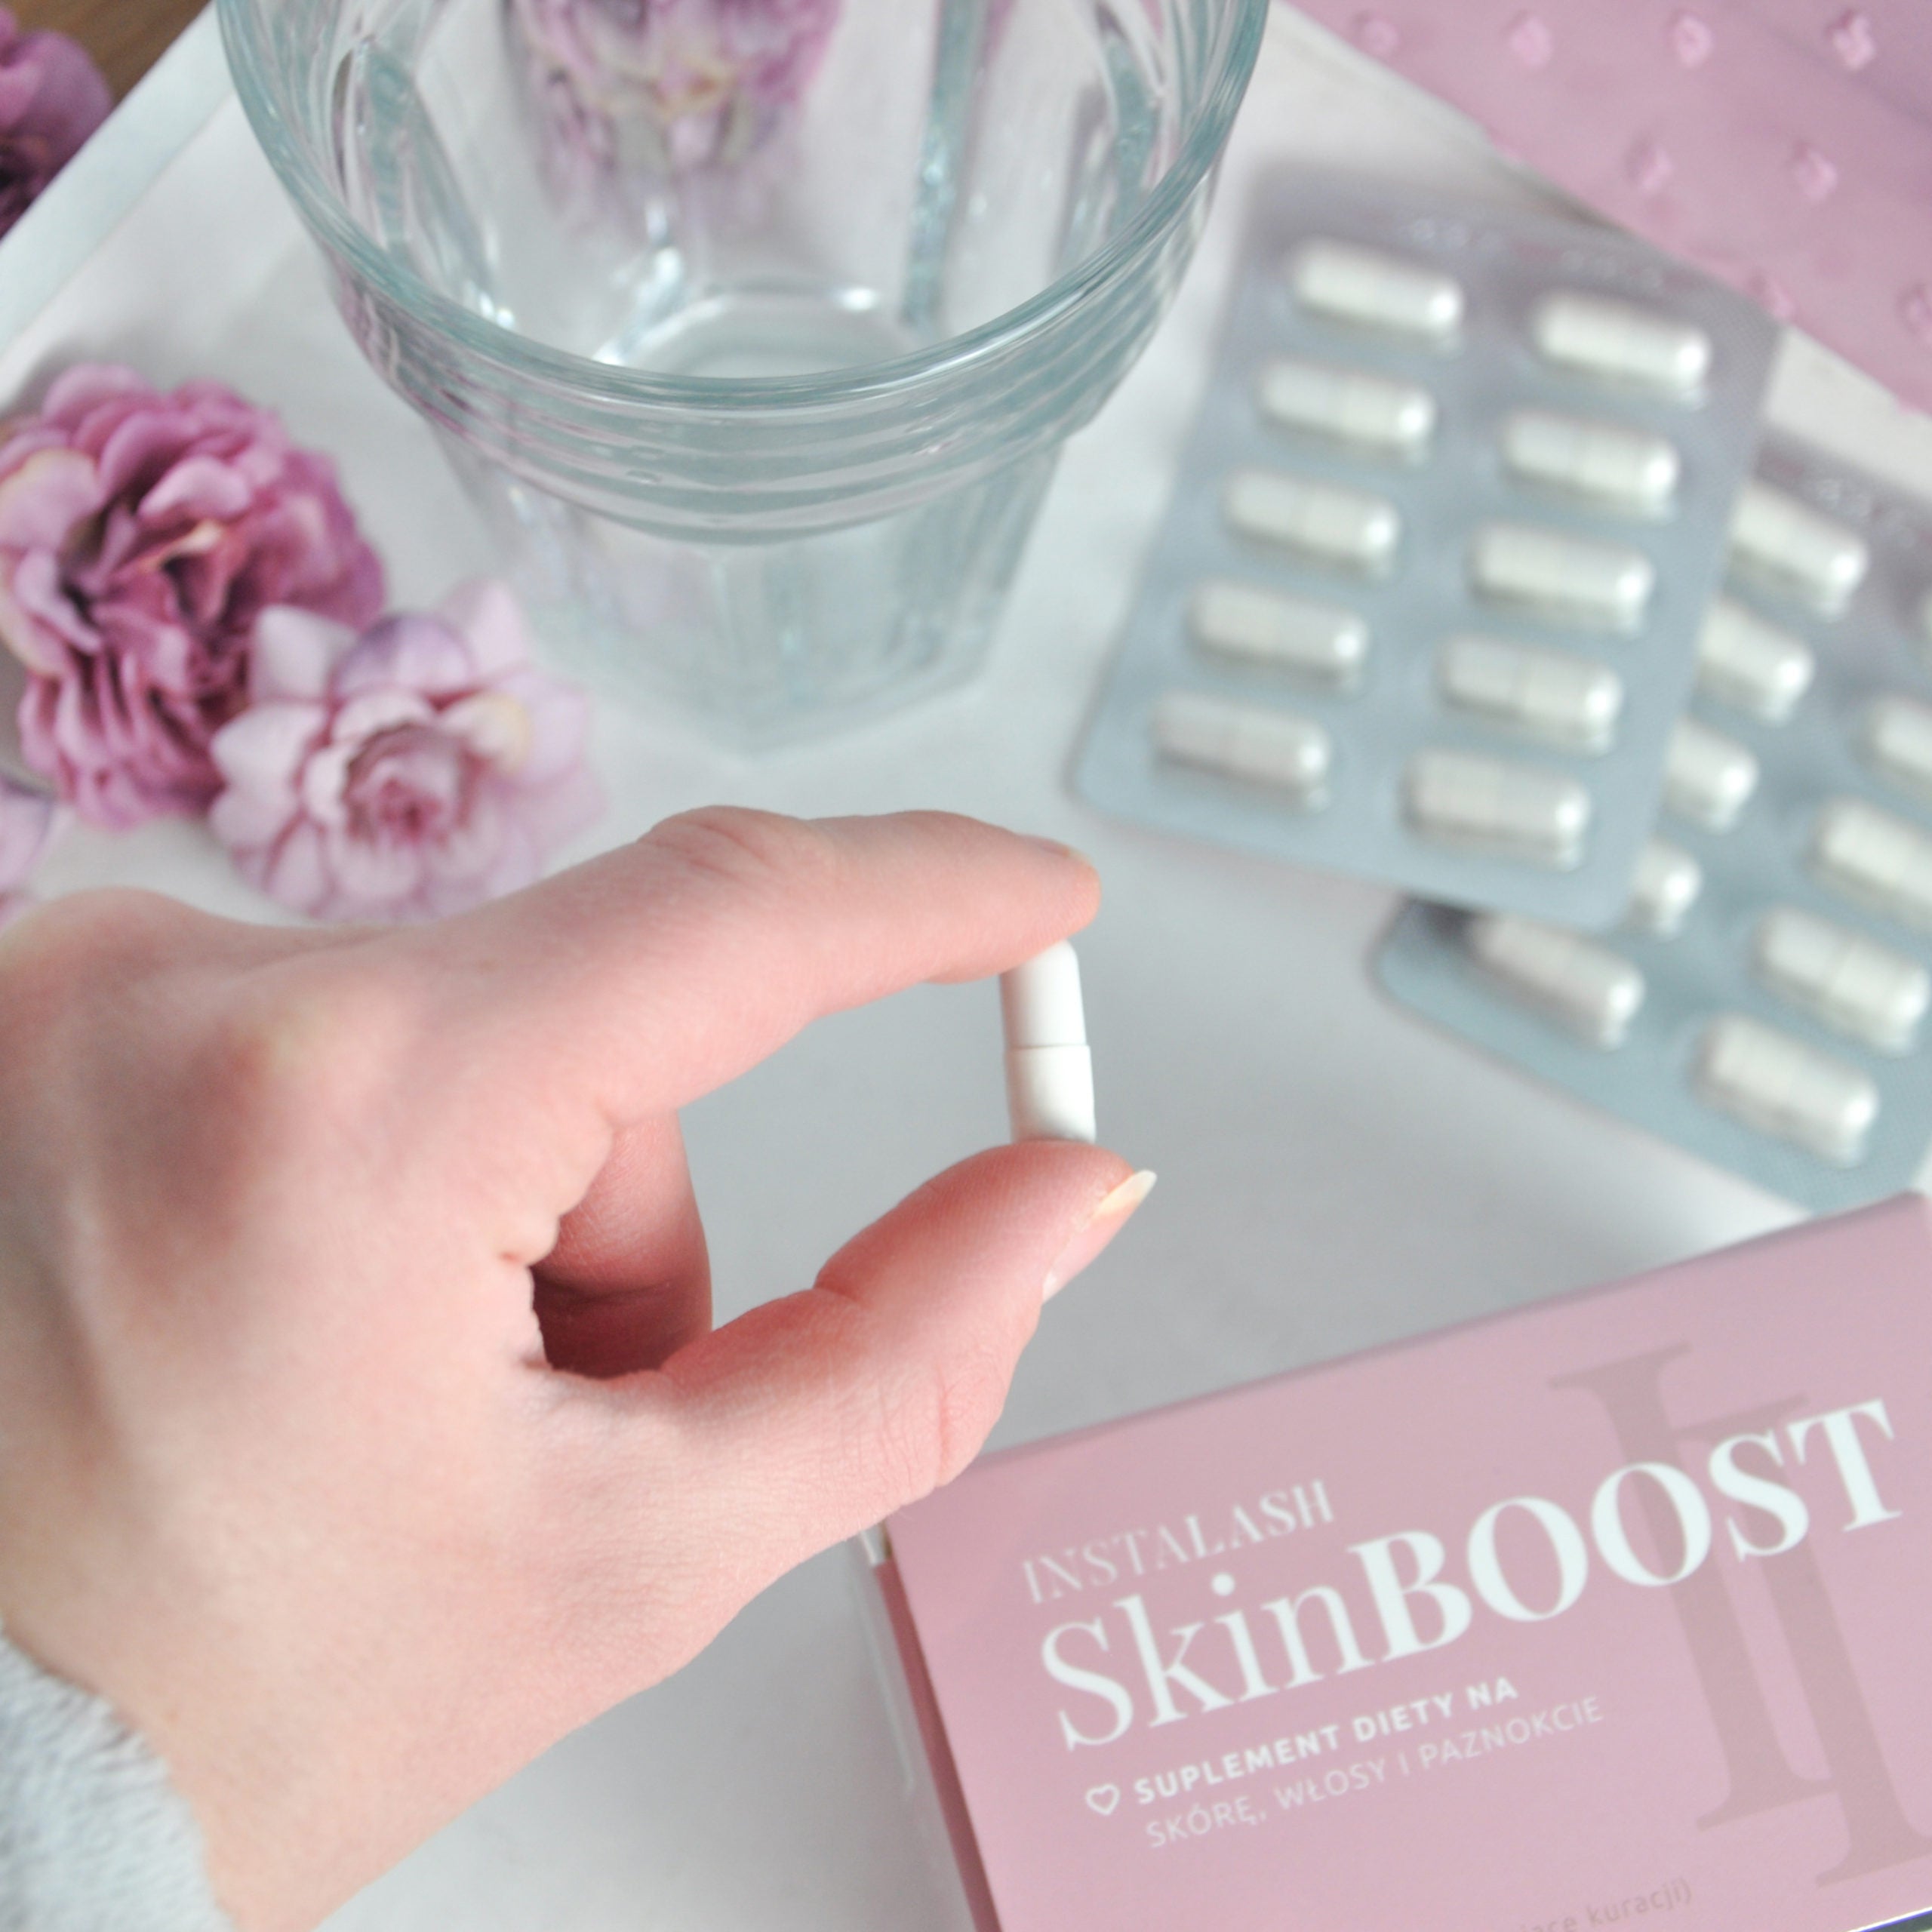 Instalash SkinBOOST – Dietary Supplement for Skin, Hair, Eyelashes & Nails 60 capsules, open packaging